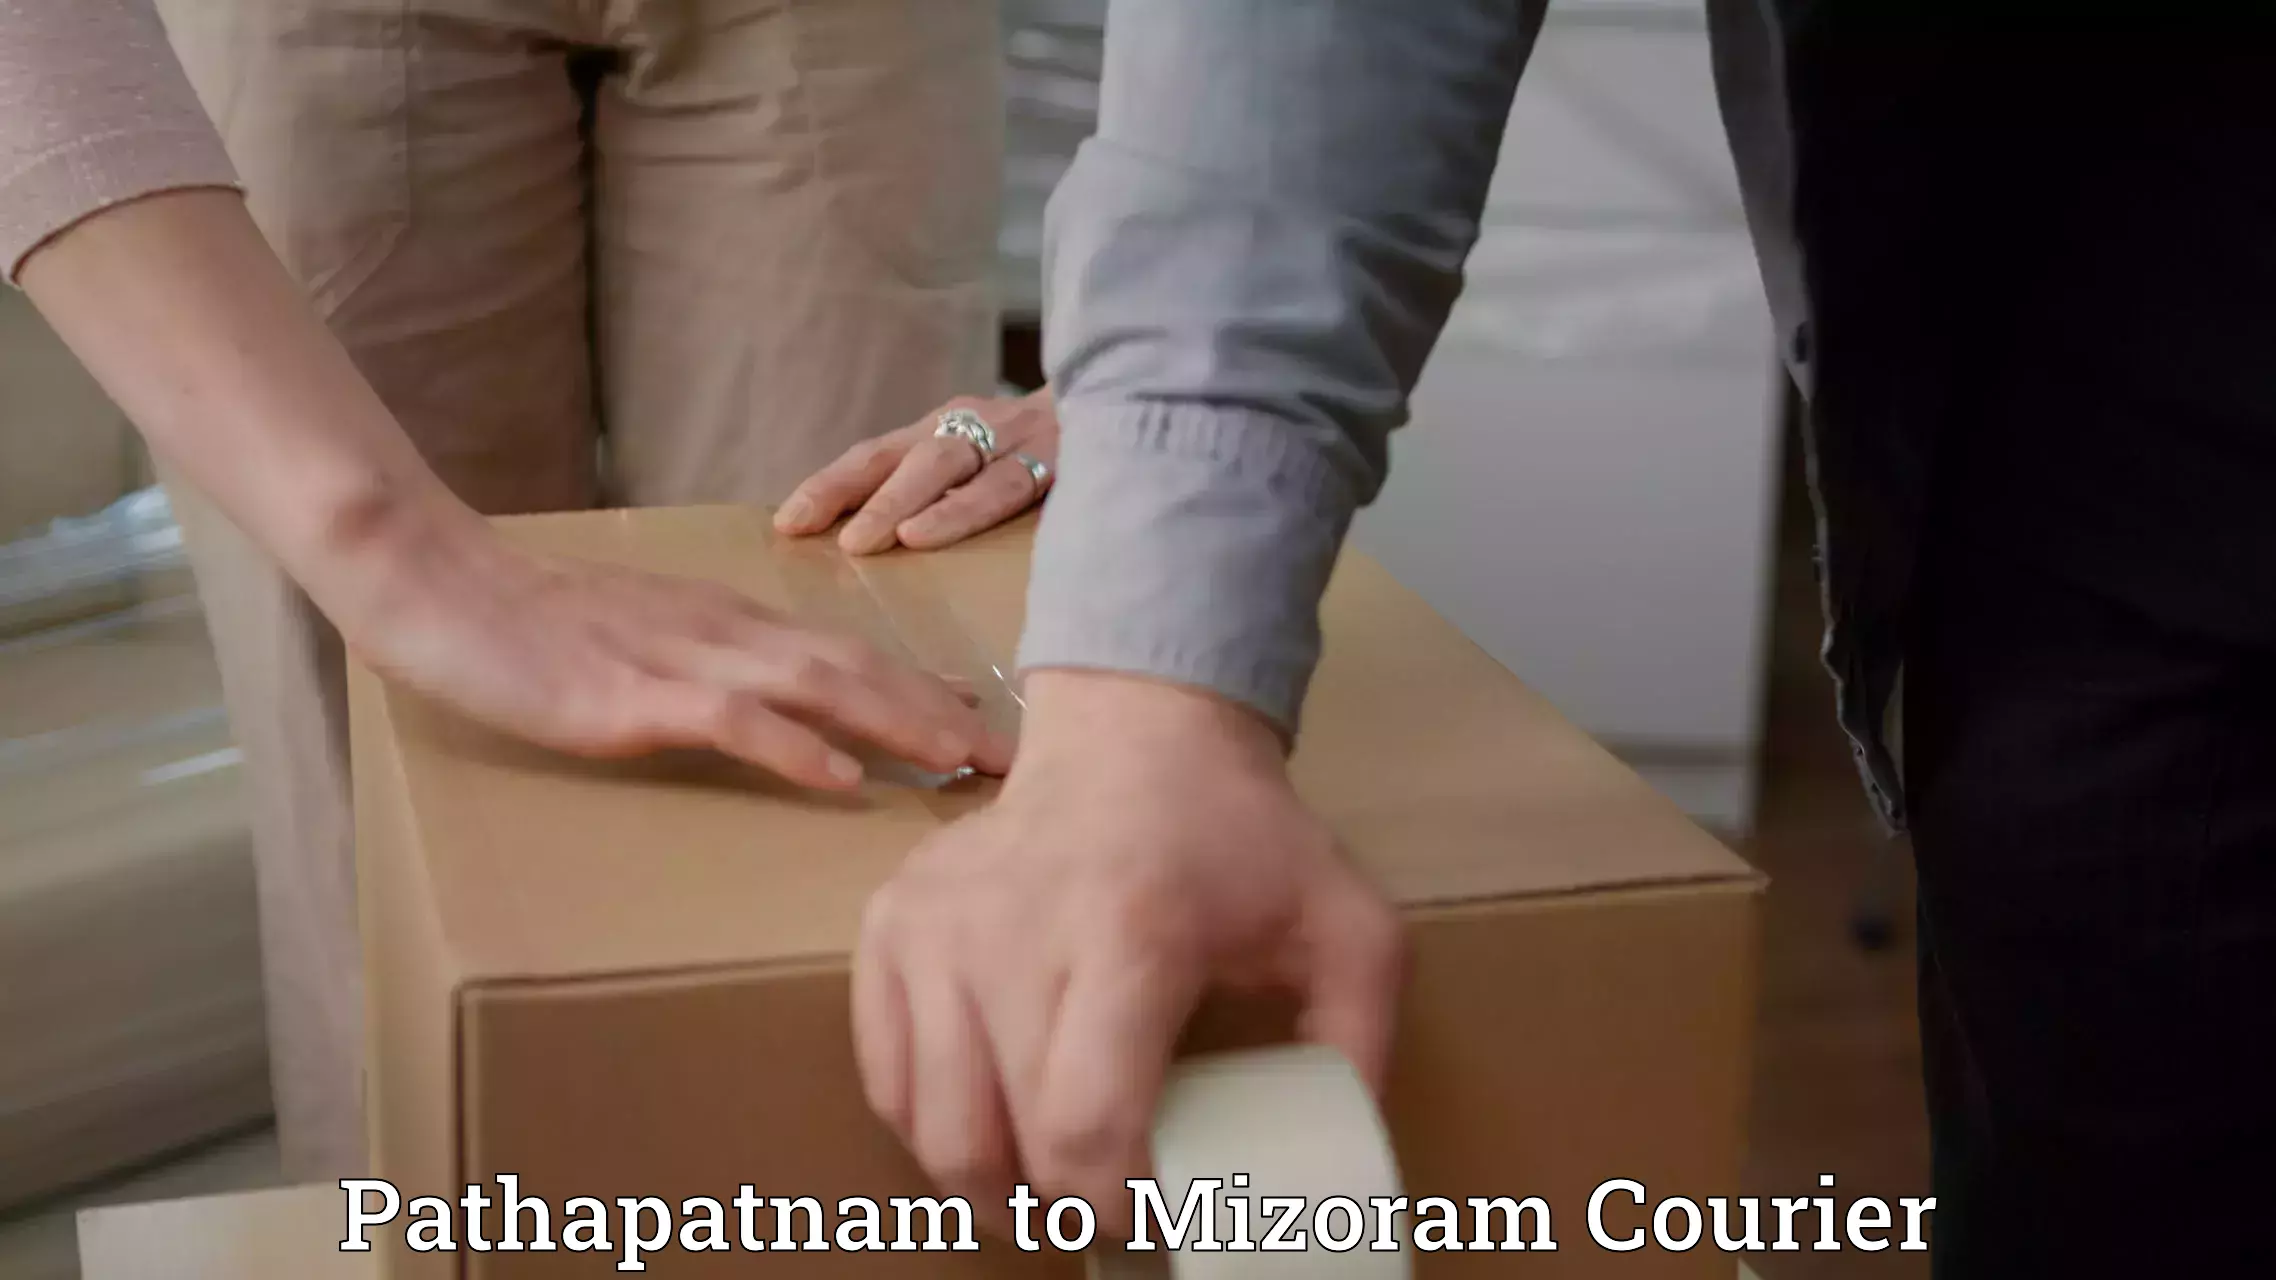 Enhanced tracking features Pathapatnam to Mizoram